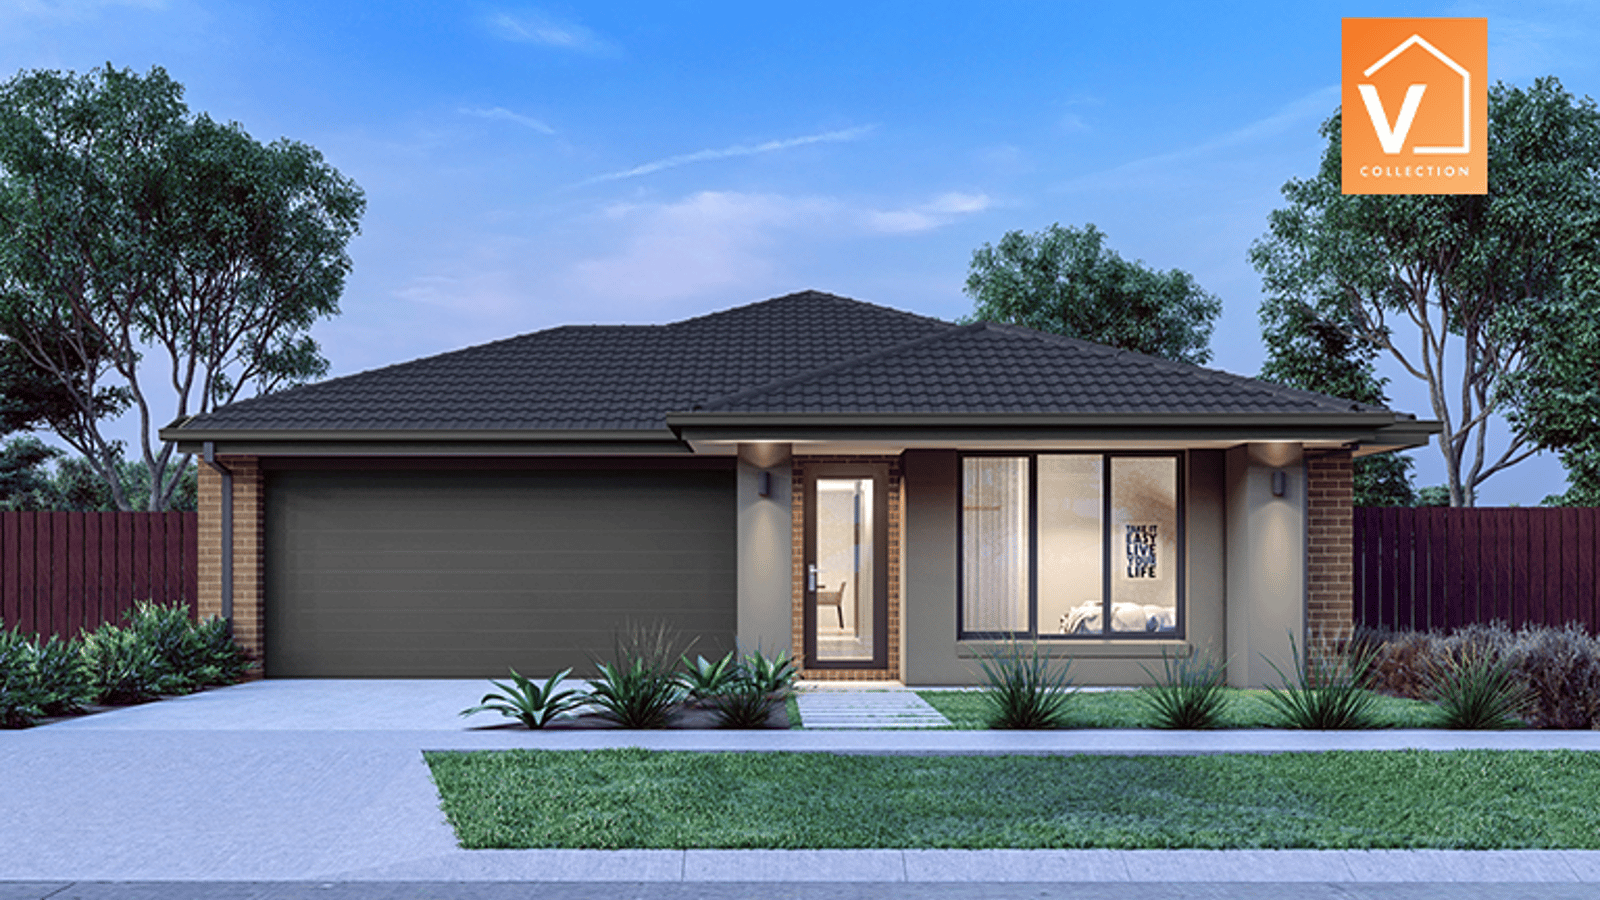 Photo of Lot 2407 Celevan Street - Smiths Lane, Clyde North VIC 3978 AUS